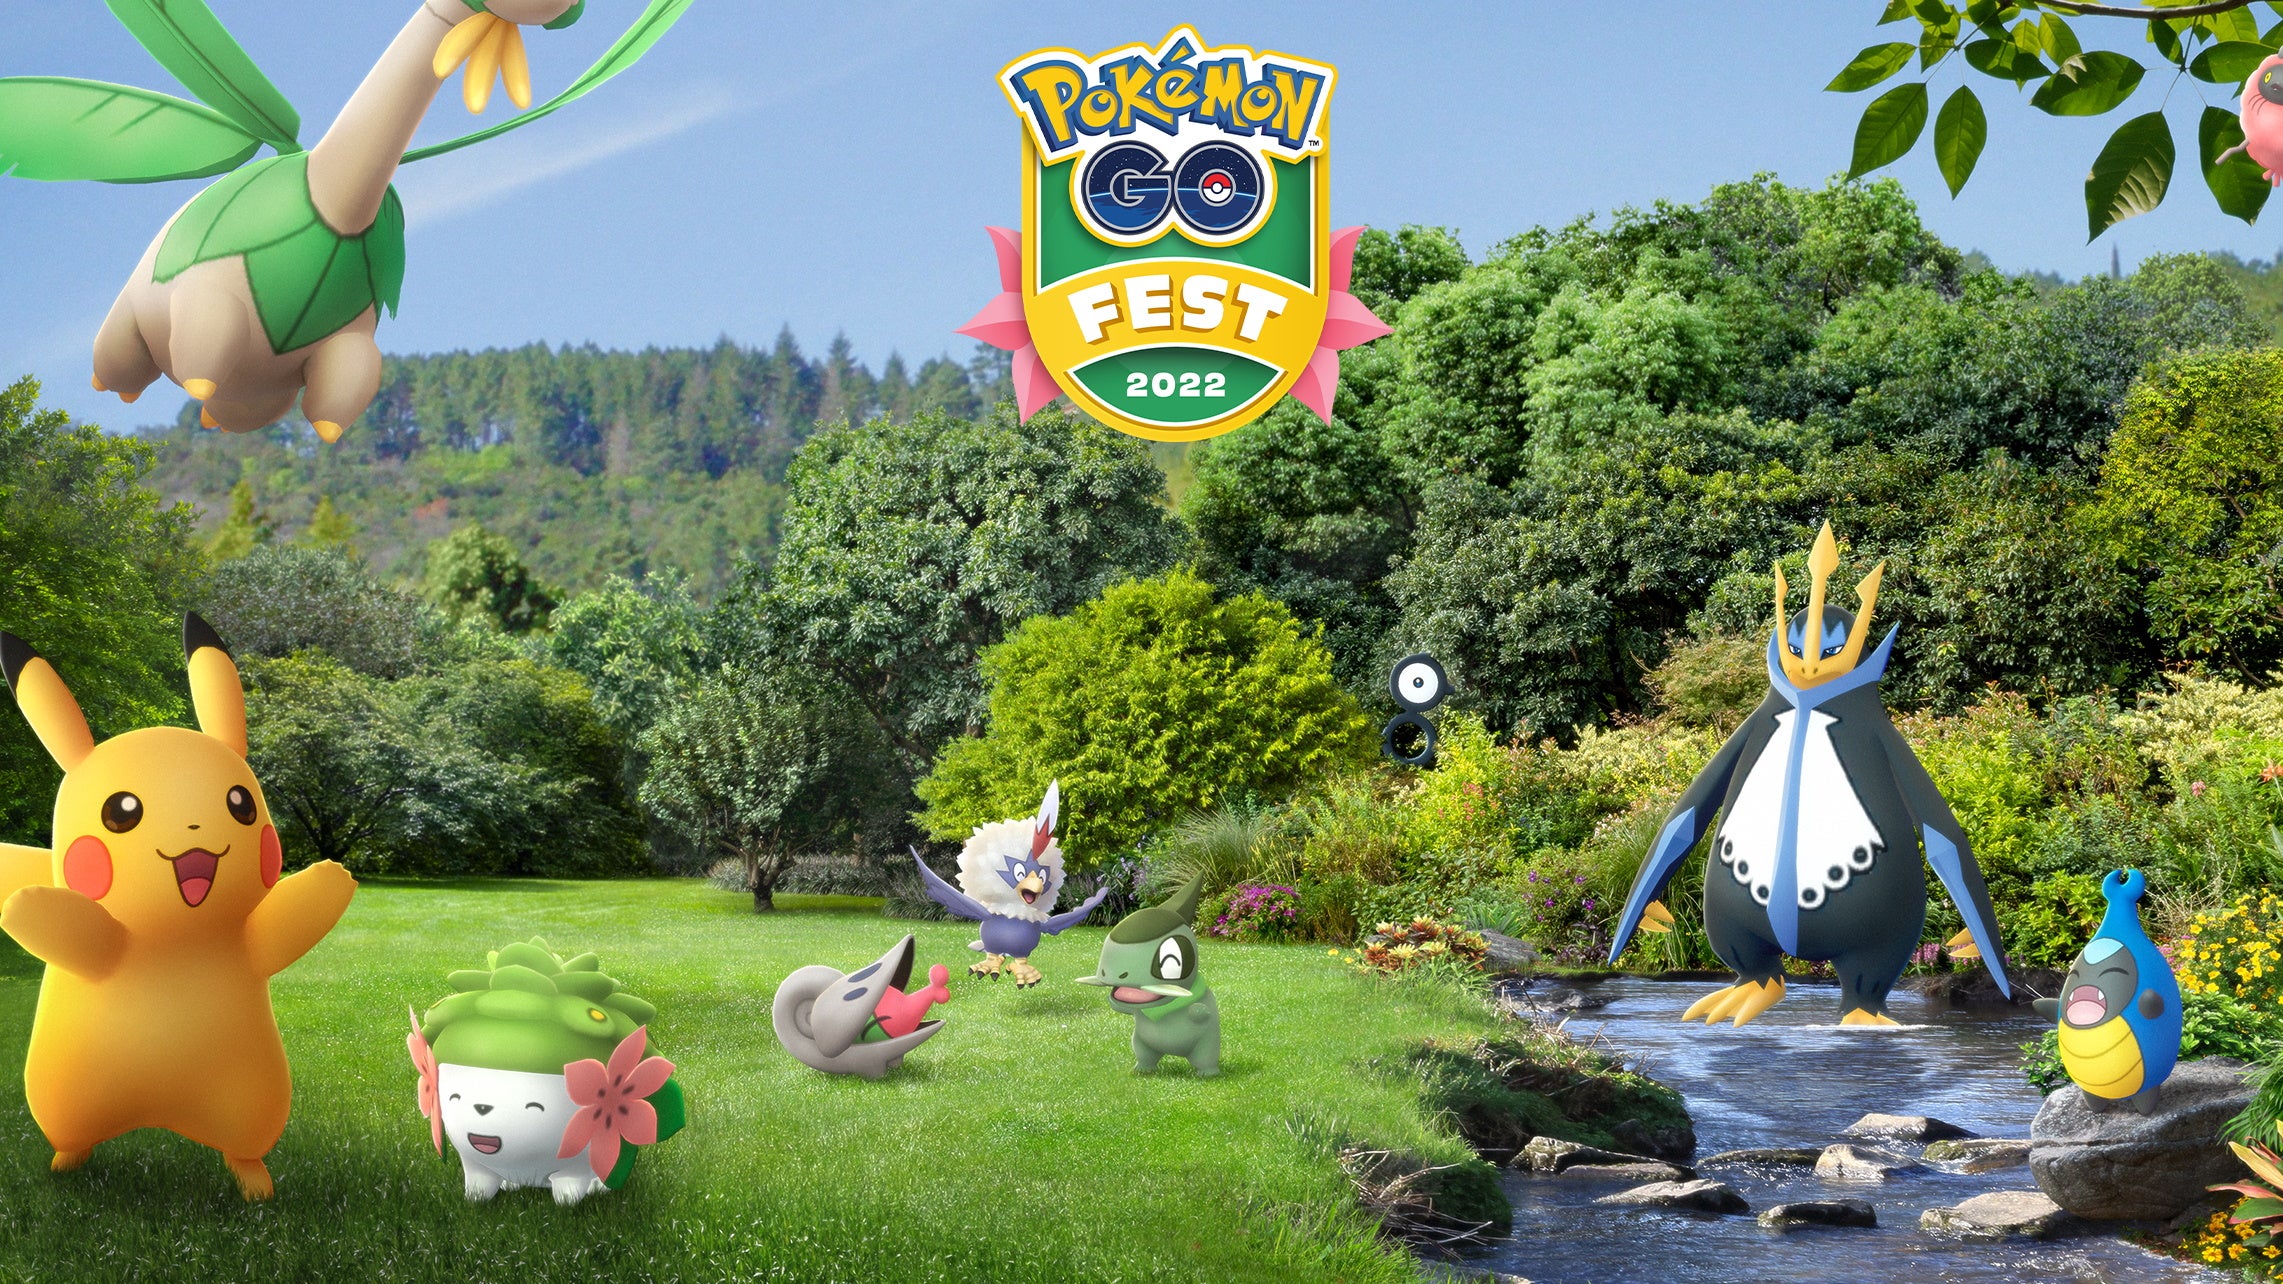 Image for Pokémon Go Fest 2022 start time, ticket price and Go Fest 2022 activities explained